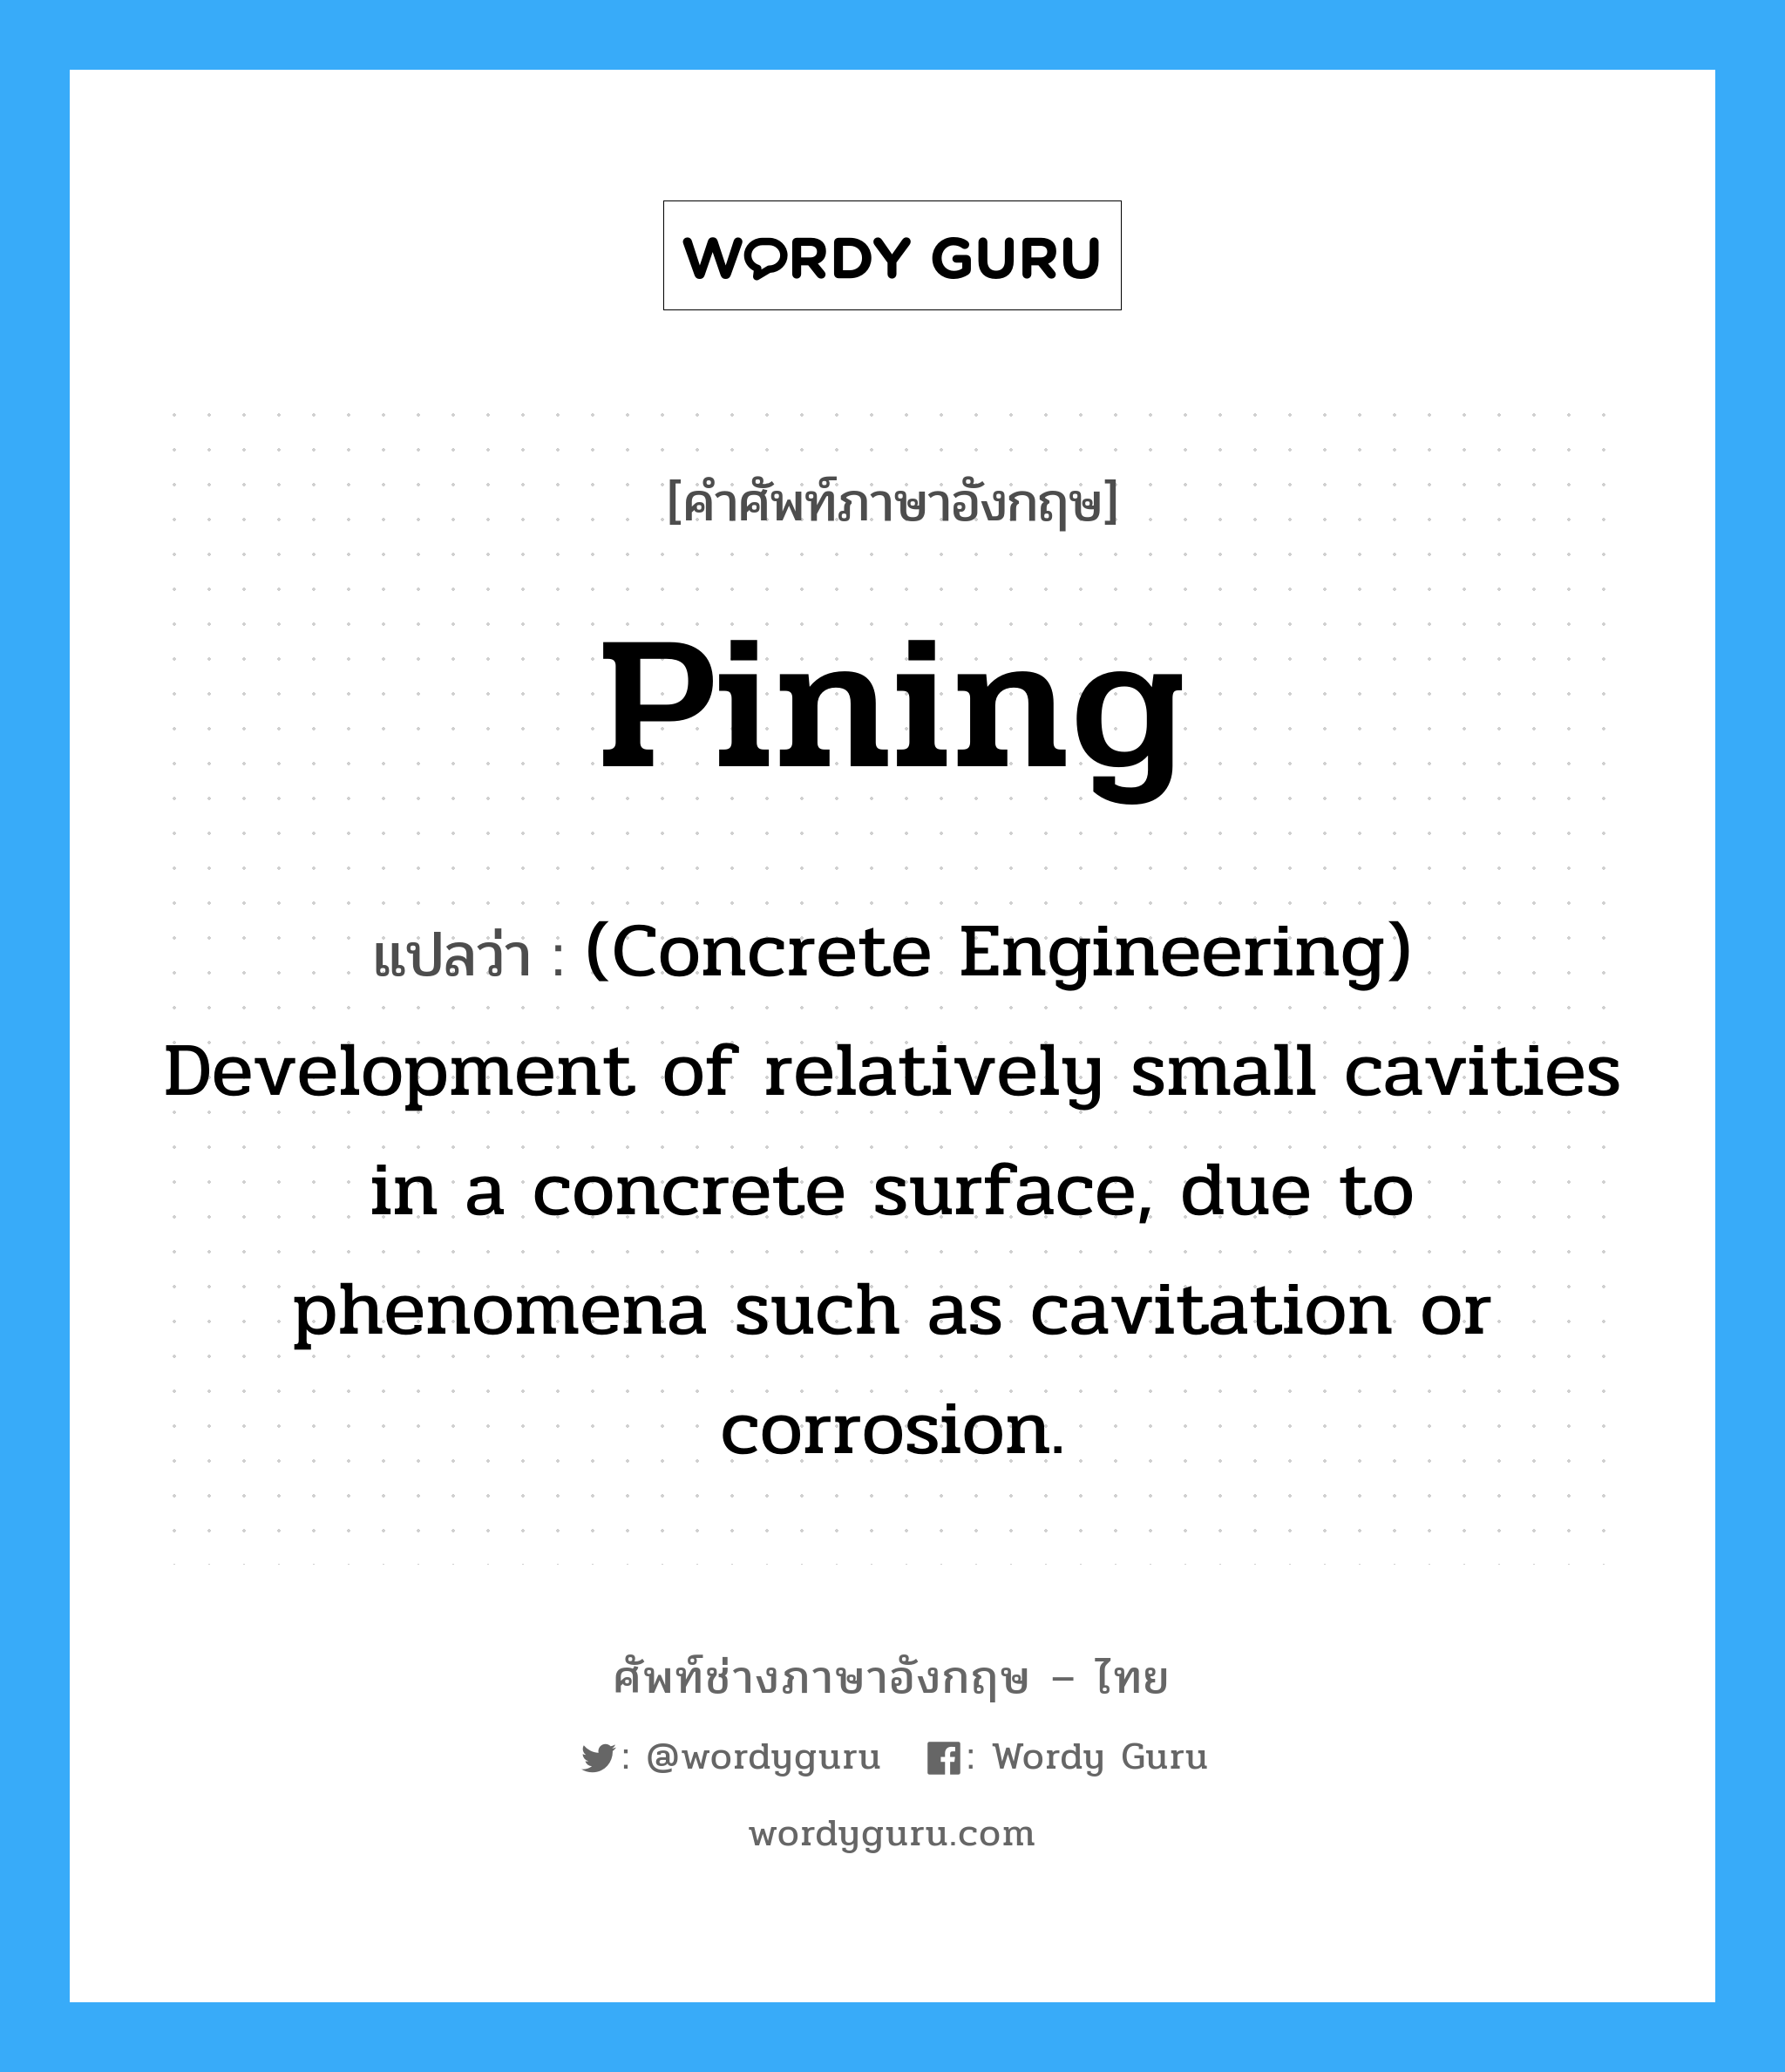 (Concrete Engineering) Development of relatively small cavities in a concrete surface, due to phenomena such as cavitation or corrosion. ภาษาอังกฤษ?, คำศัพท์ช่างภาษาอังกฤษ - ไทย (Concrete Engineering) Development of relatively small cavities in a concrete surface, due to phenomena such as cavitation or corrosion. คำศัพท์ภาษาอังกฤษ (Concrete Engineering) Development of relatively small cavities in a concrete surface, due to phenomena such as cavitation or corrosion. แปลว่า Pining